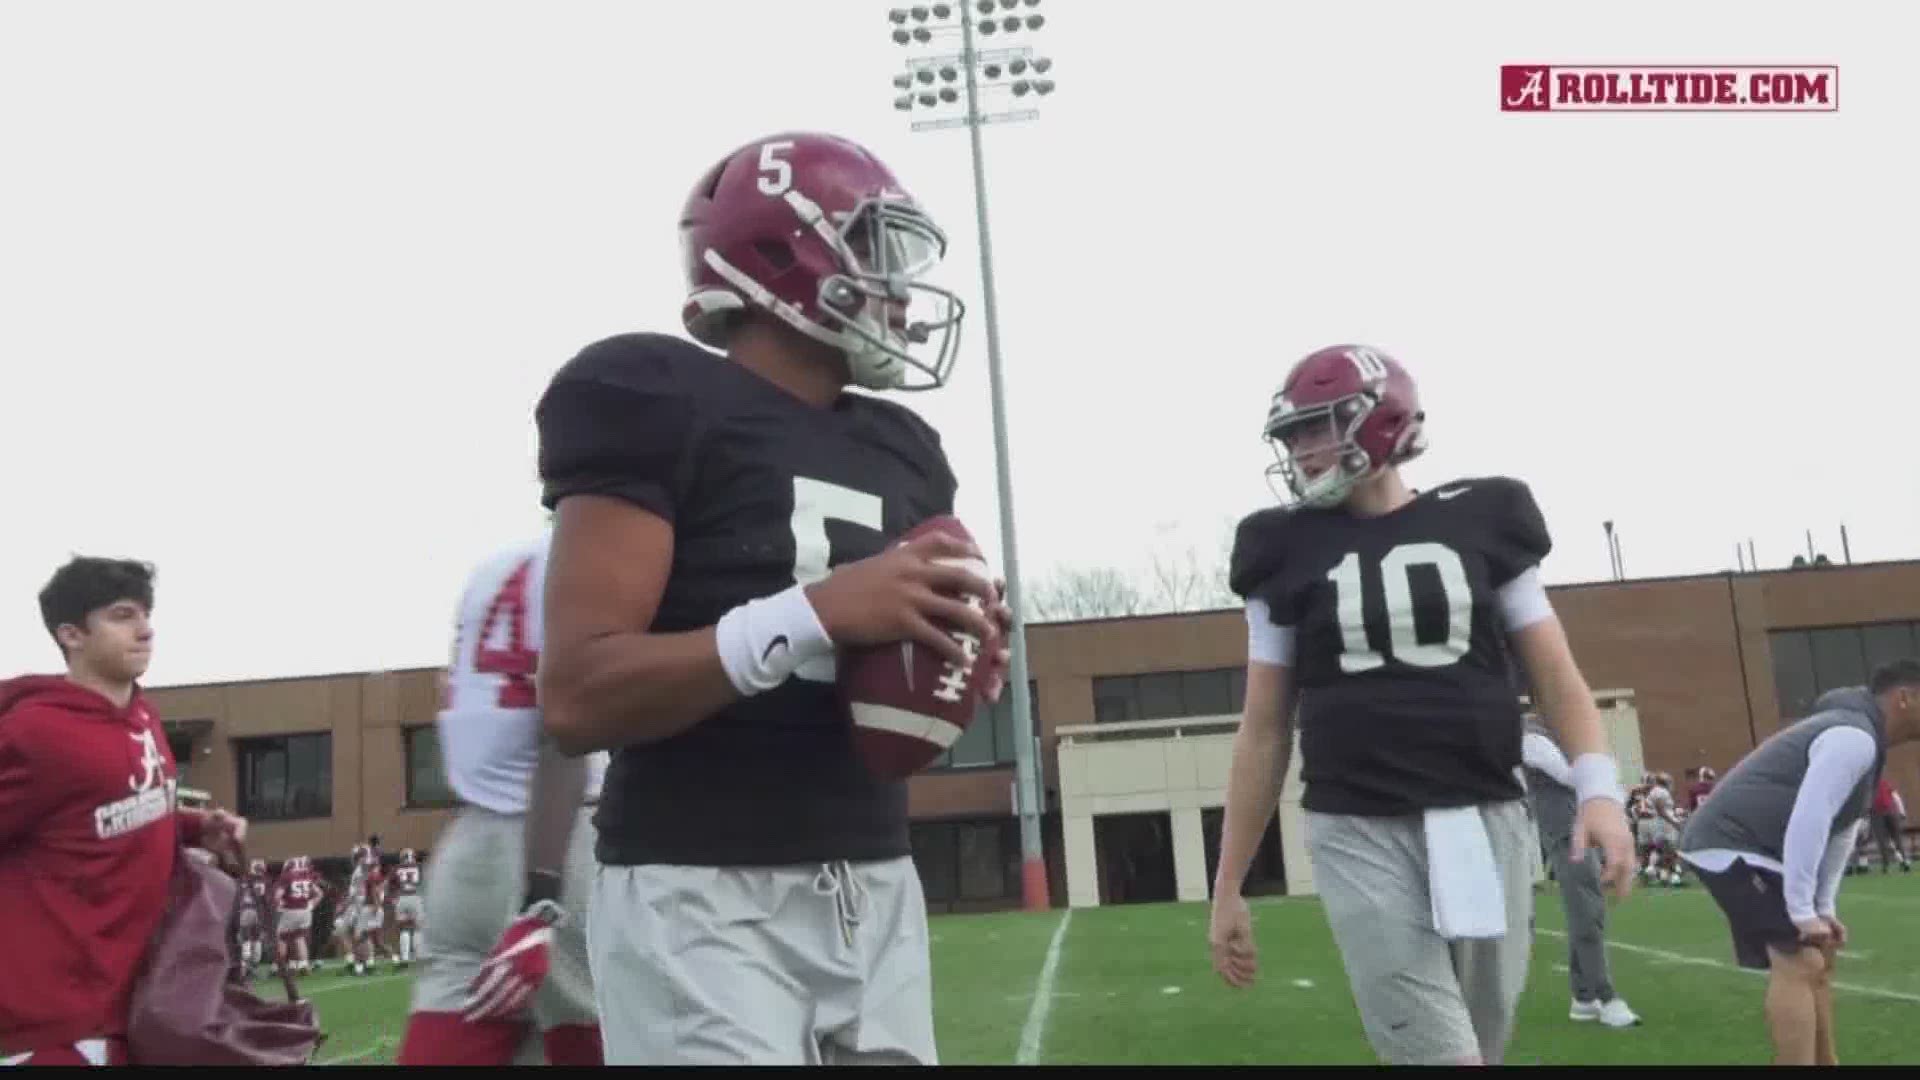 Quarterback Taulia Tagovailoa announced Friday he is transferring to Maryland. The former Alabama quarterback entered the transfer portal on May 8th.